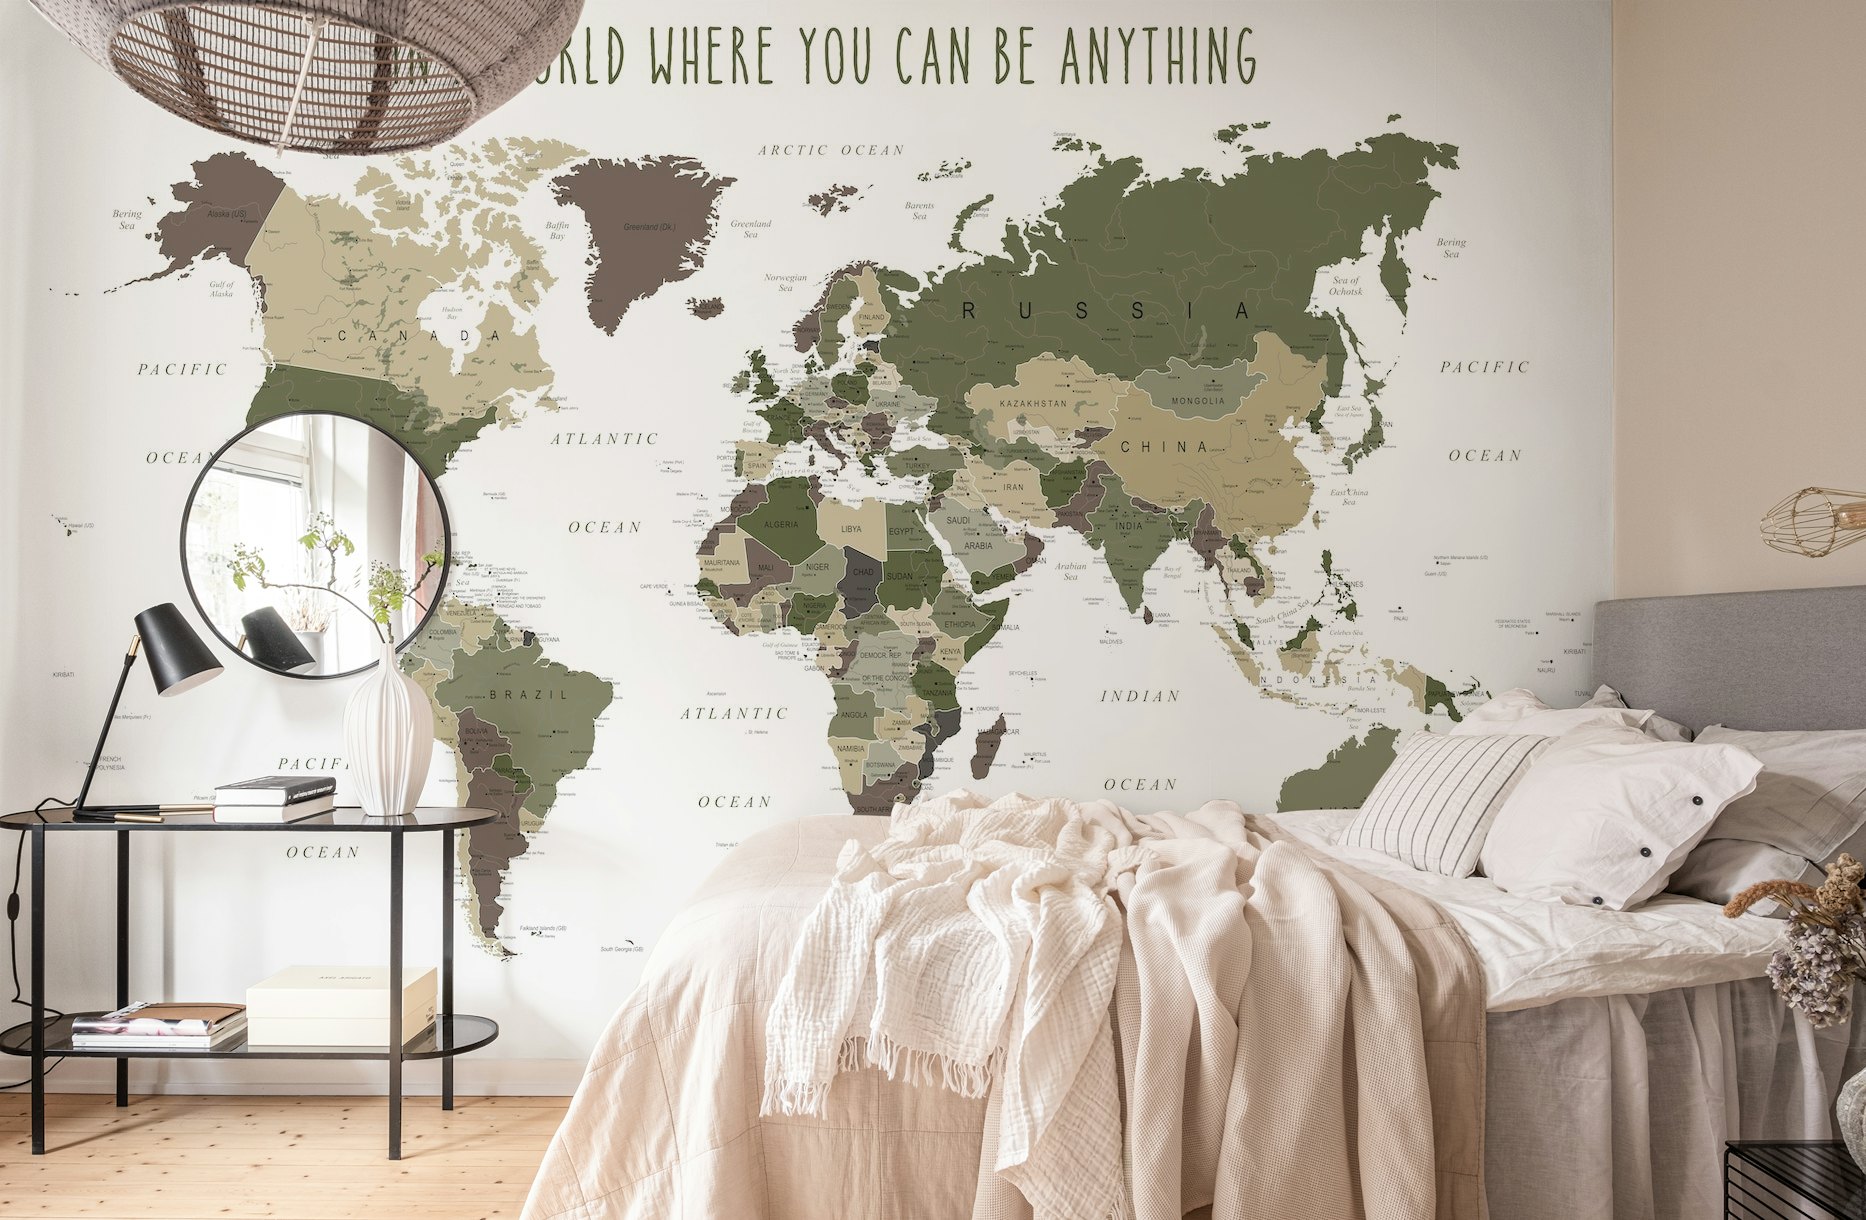 Be Kind World Map behang